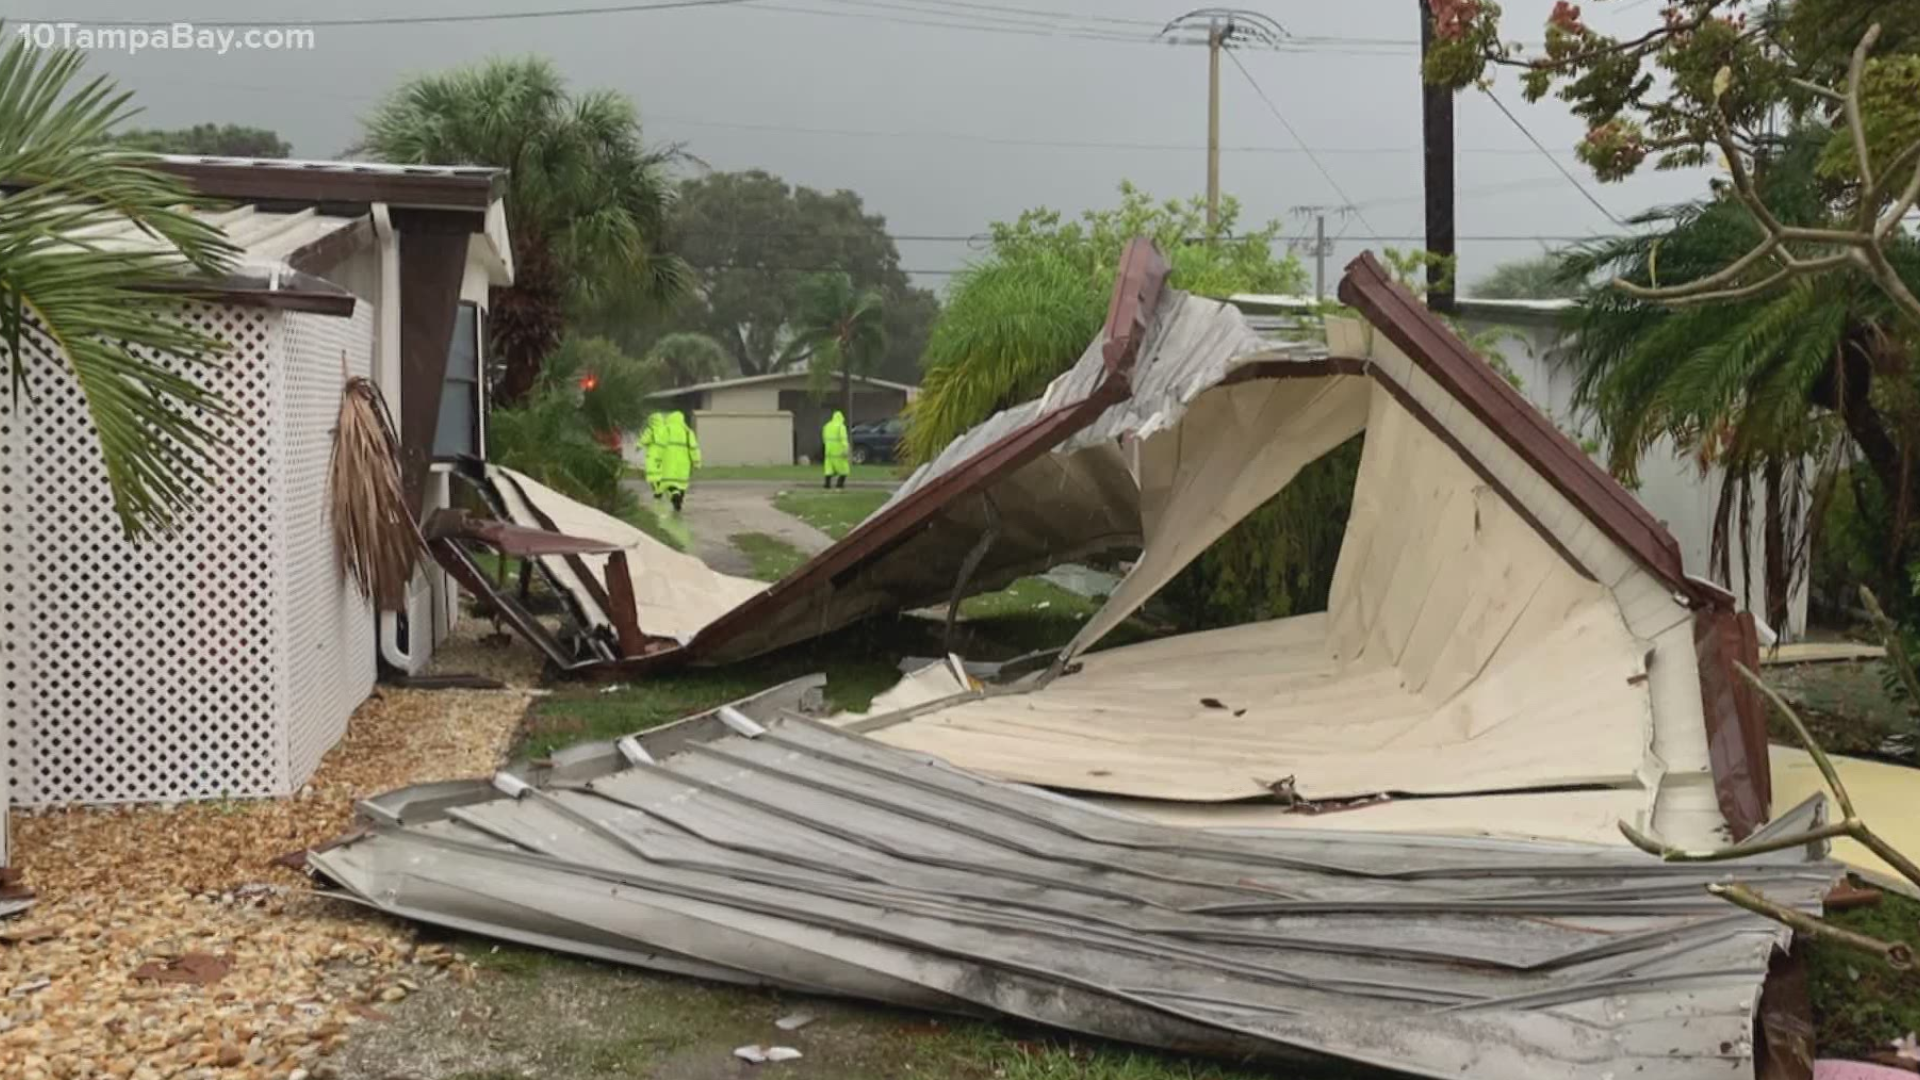 The roof blew off an unoccupied manufactured home at the Municipal Mobile Home Park in Venice, Florida.